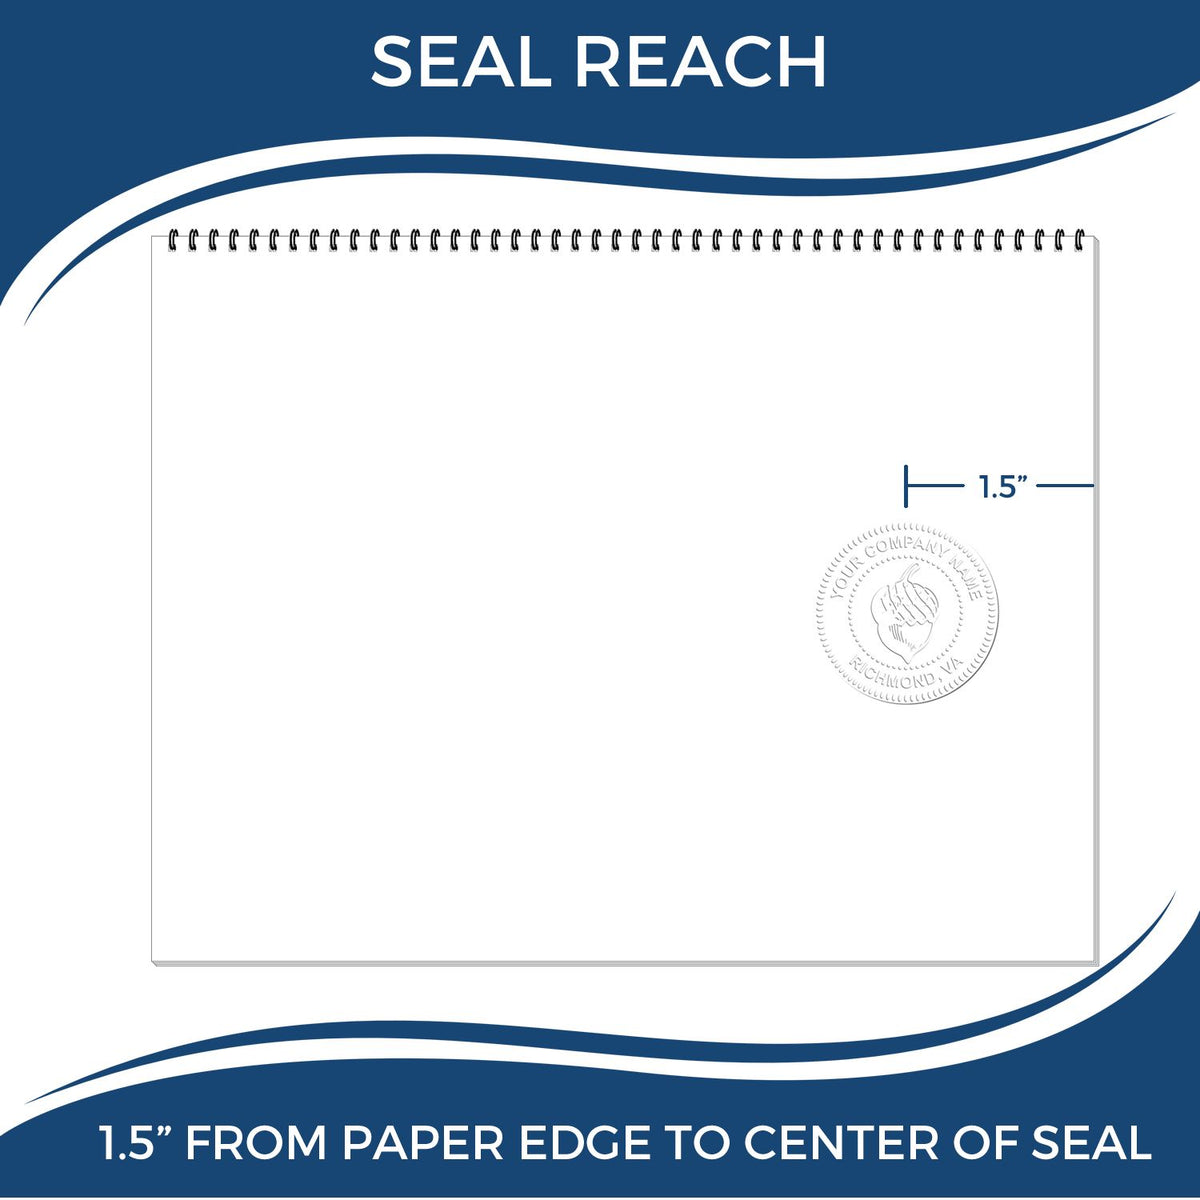 An infographic showing the seal reach which is represented by a ruler and a miniature seal image of the Handheld Michigan Land Surveyor Seal